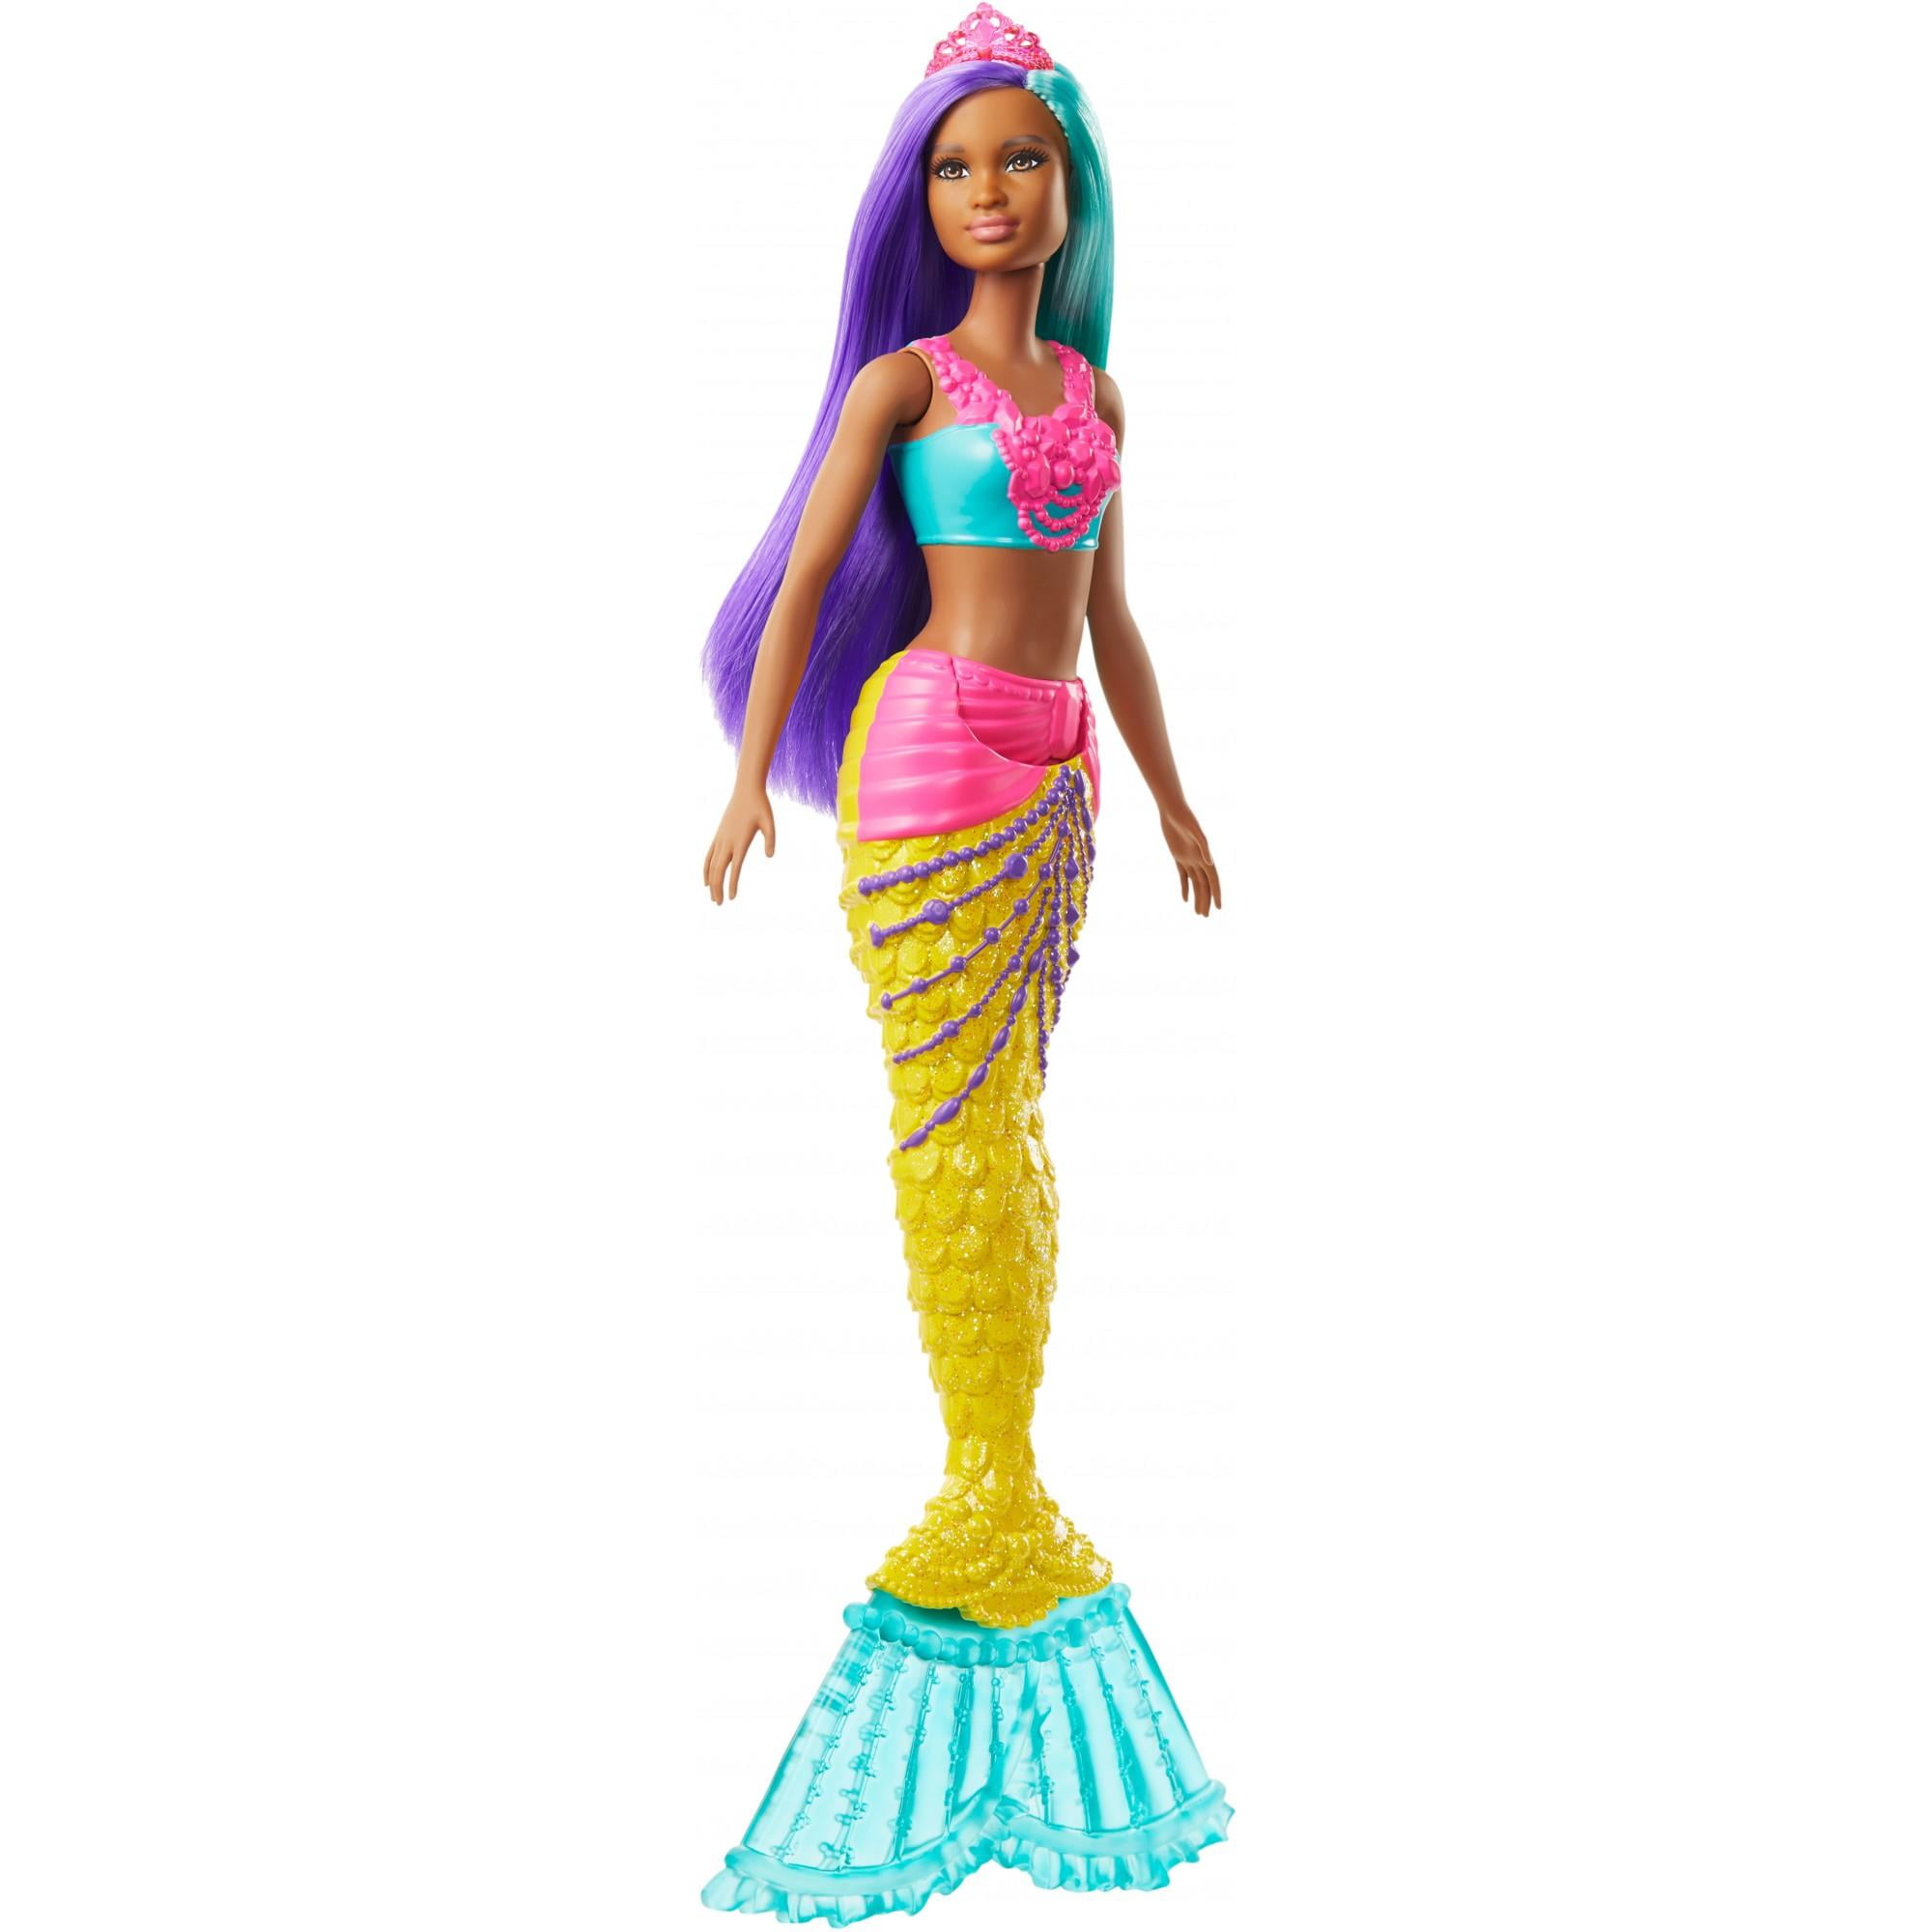 Barbie Dreamtopia Mermaid Doll Hair Styling Head with tiara and accessories. 